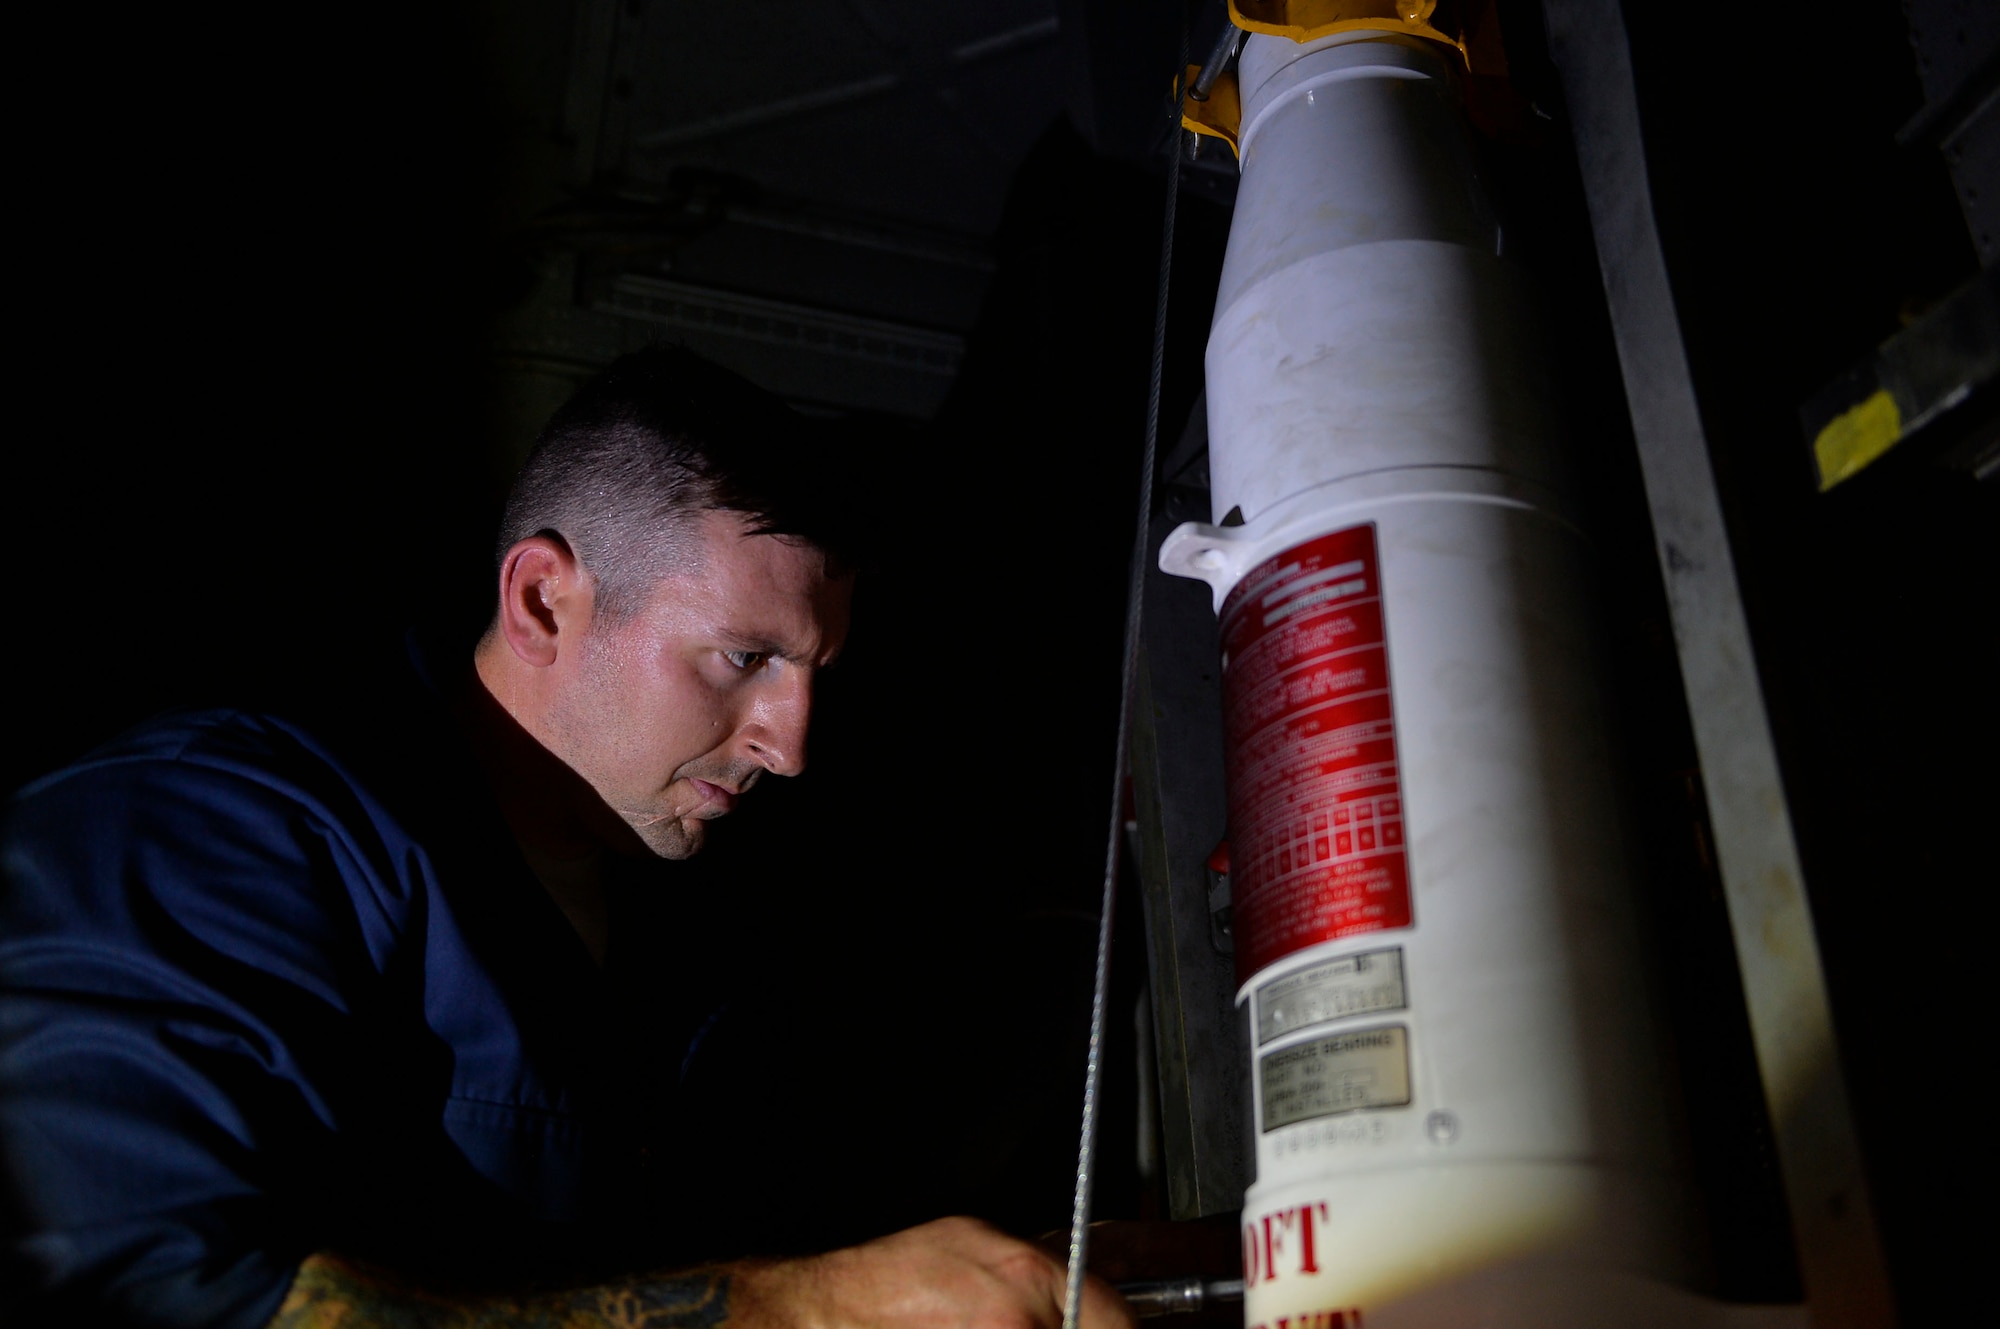 U.S. Air Force Staff Sgt. Andrew Jean, 86th Aircraft Maintenance Squadron aerospace repair crew chief, installs a strut in the wheel well of a C-130J Super Hercules on Powidz Air Base, Poland, Aug. 3, 2018. Struts are shock absorbers found in the landing gear of aircraft which help mitigate the impact of landing. (U.S. Air Force photo by Senior Airman Joshua Magbanua)